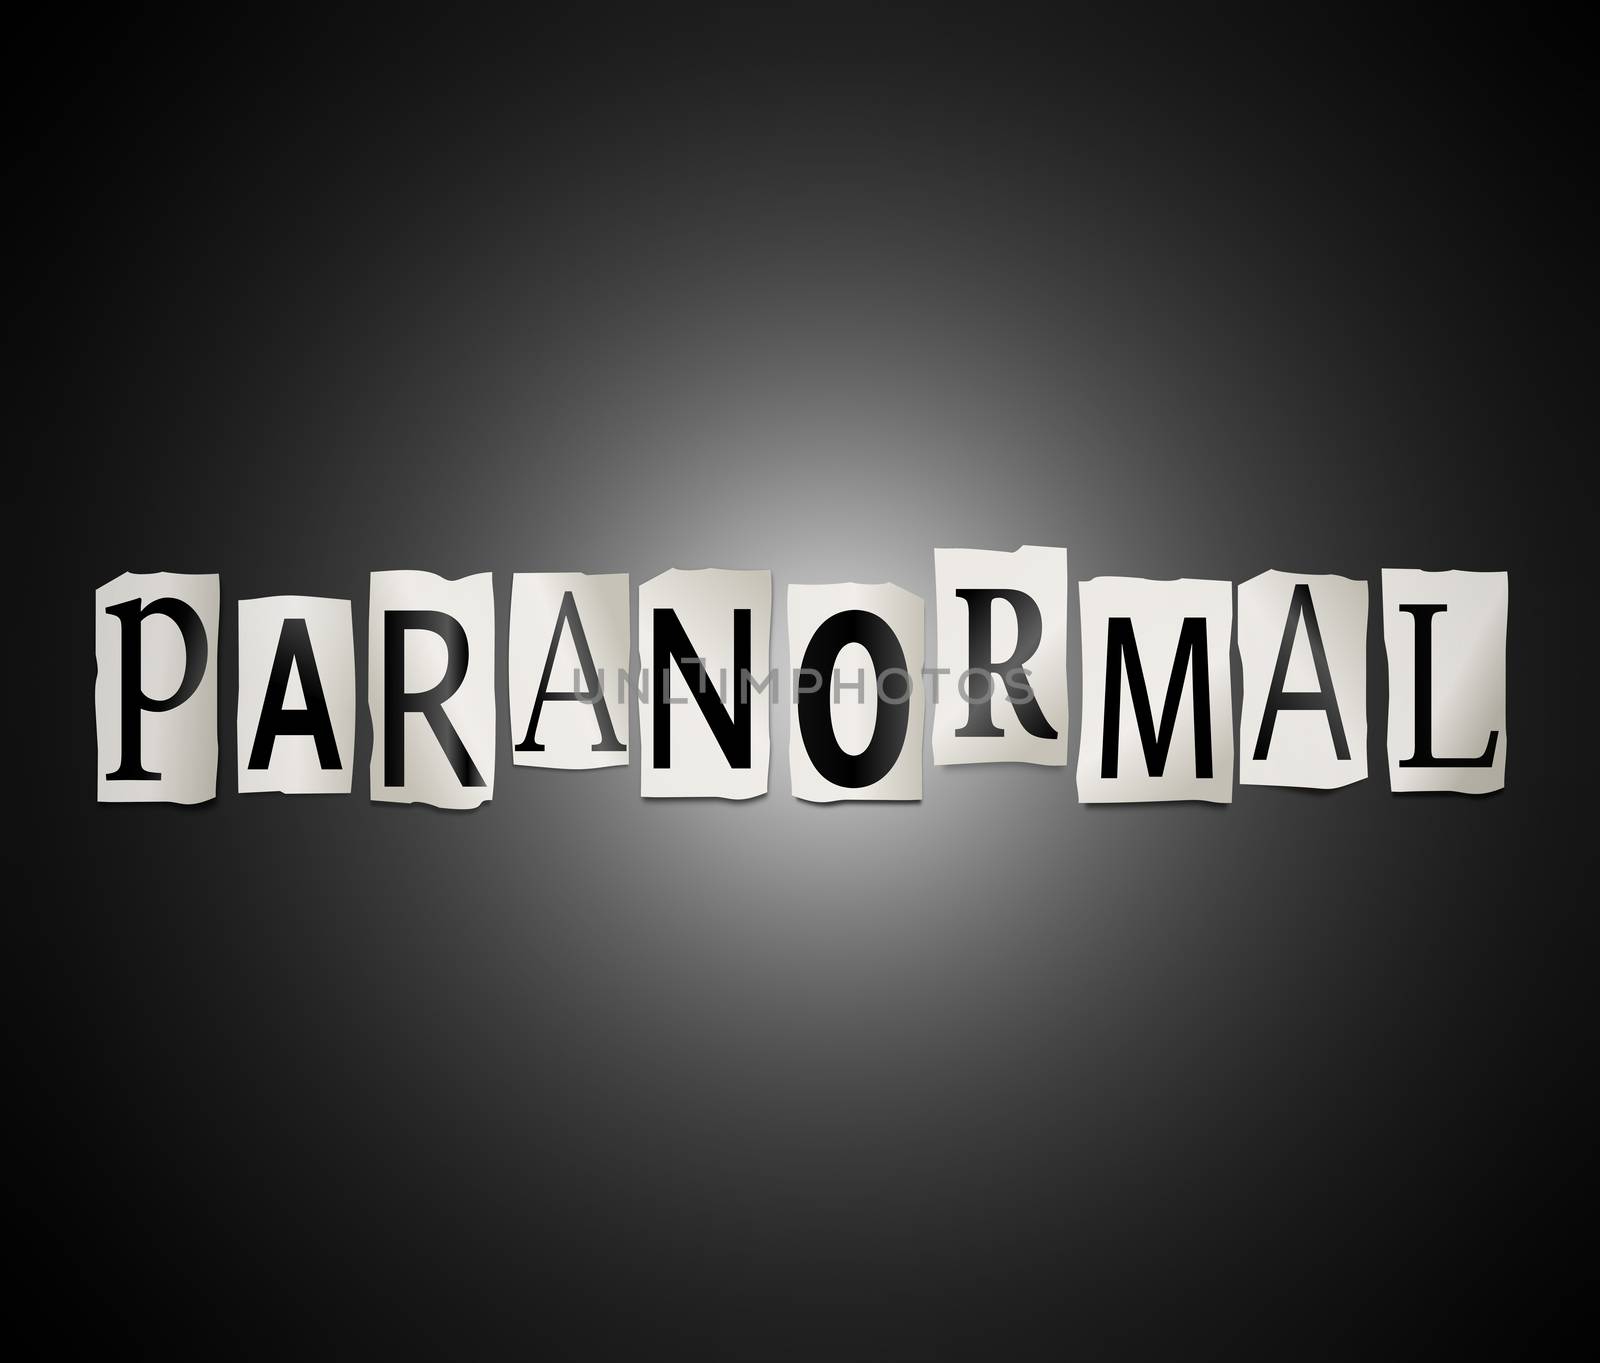 Illustration depicting a set of cut out printed letters arranged to form the word paranormal.